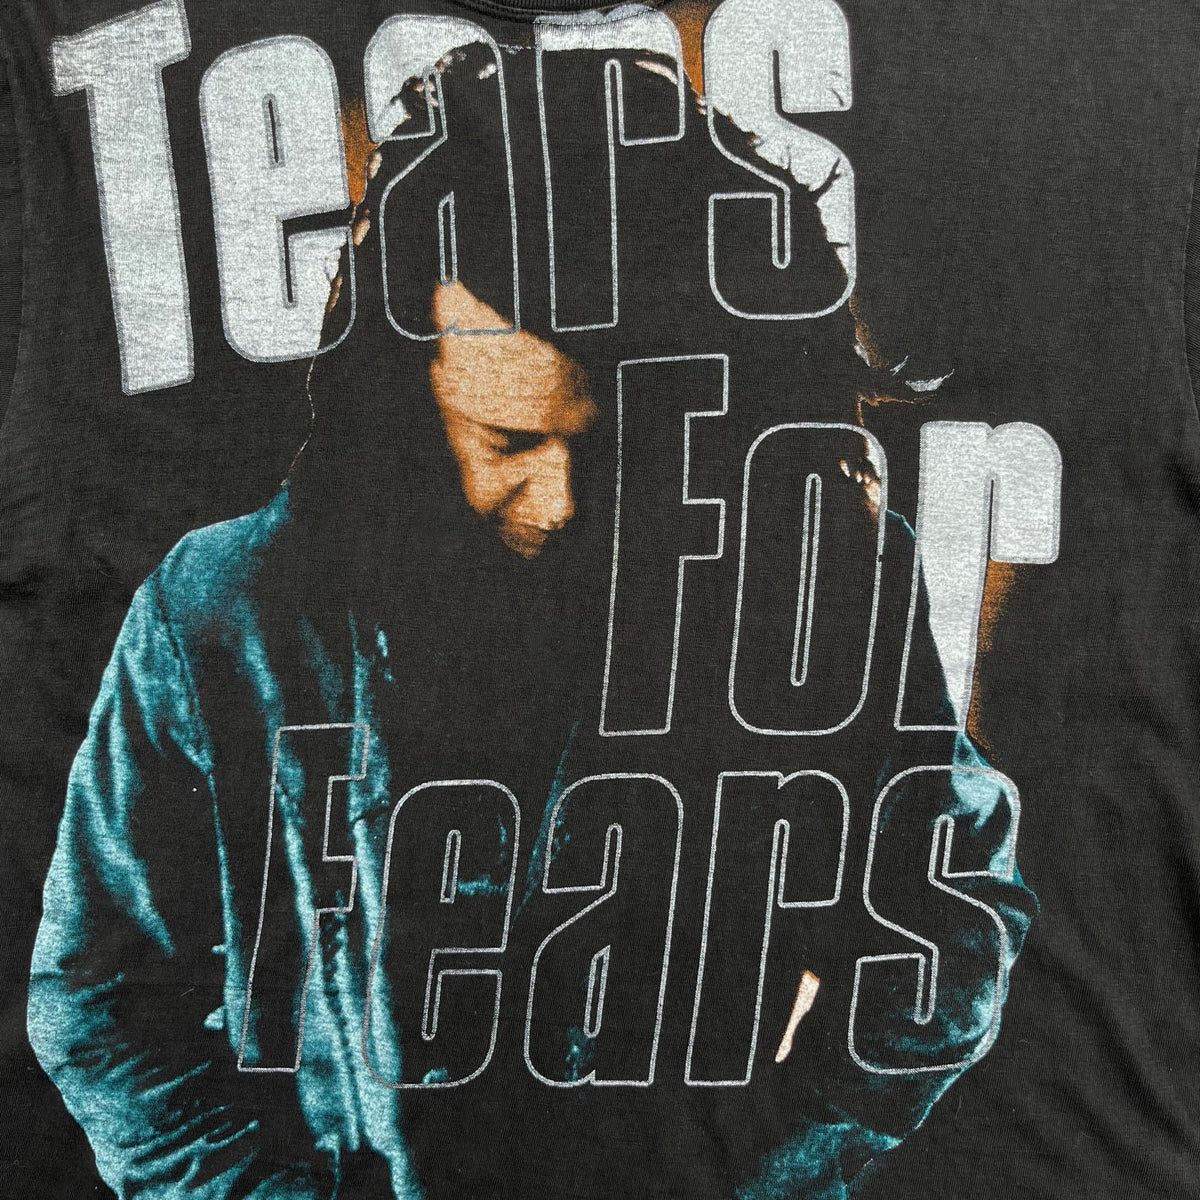 TEARS FOR FEARS 'ELEMENTAL' '93 T-SHIRT – Temple of Nostalgia